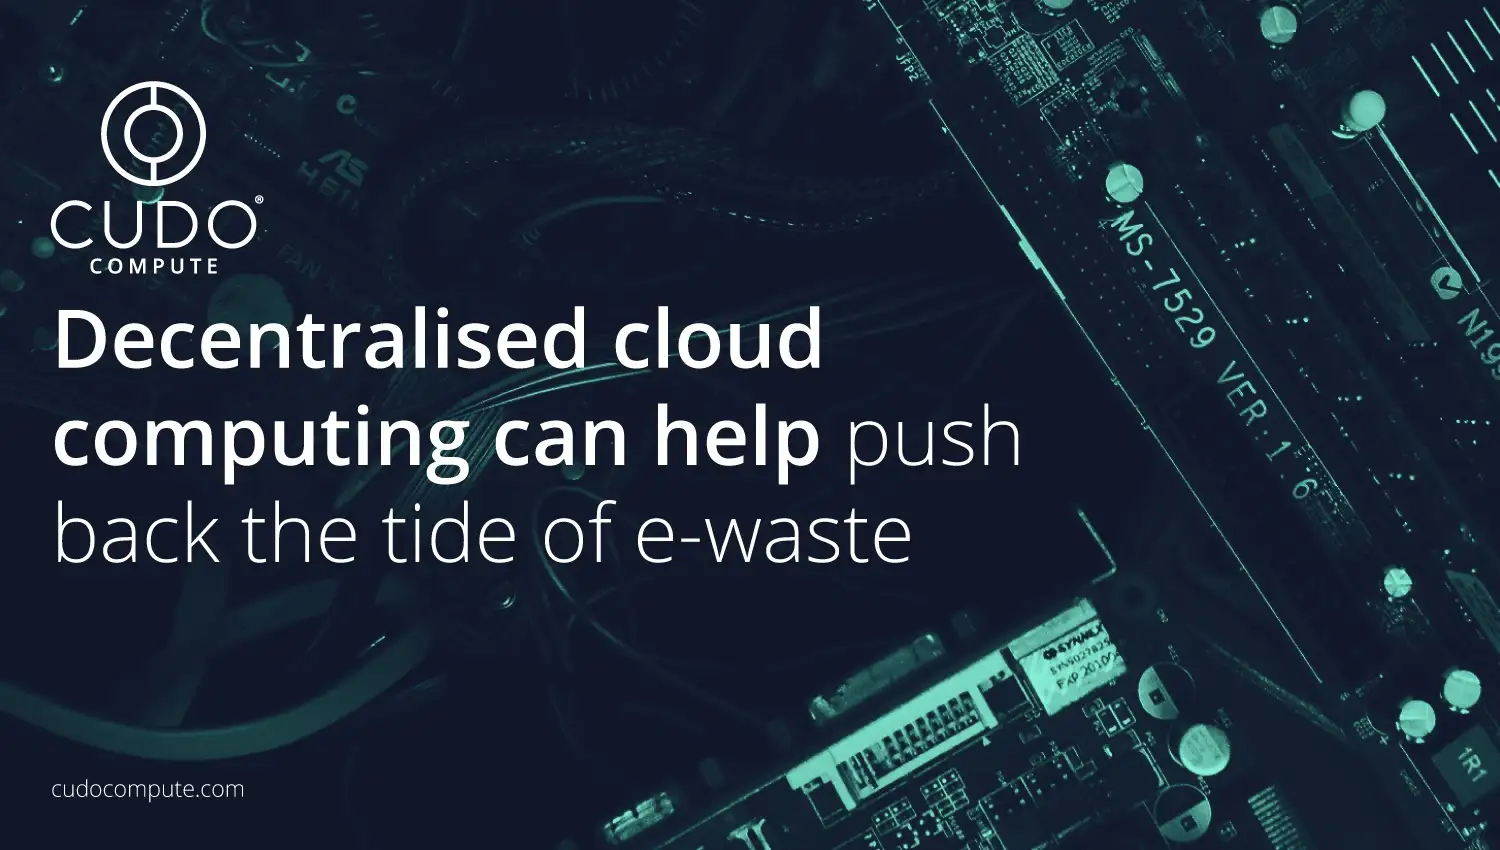 Decentralised cloud computing can help push back the tide of e-waste cover photo